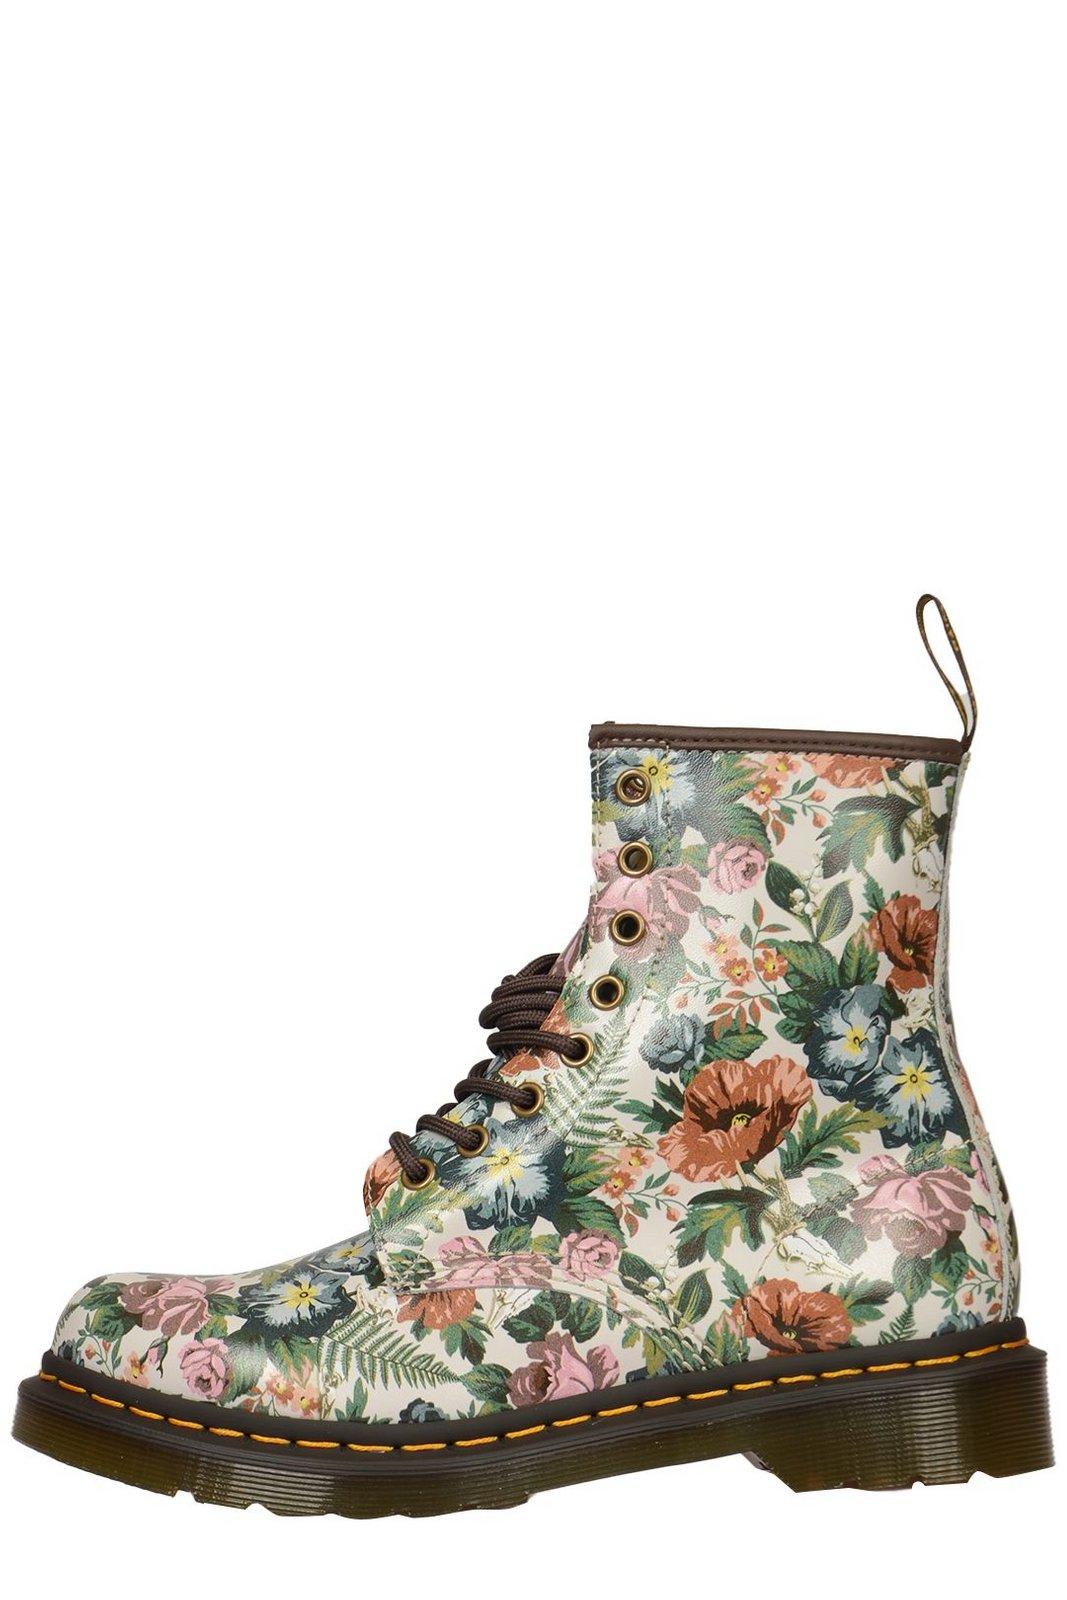 DR. MARTENS' 1460 ALL-OVER PRINTED LACE-UP BOOTS